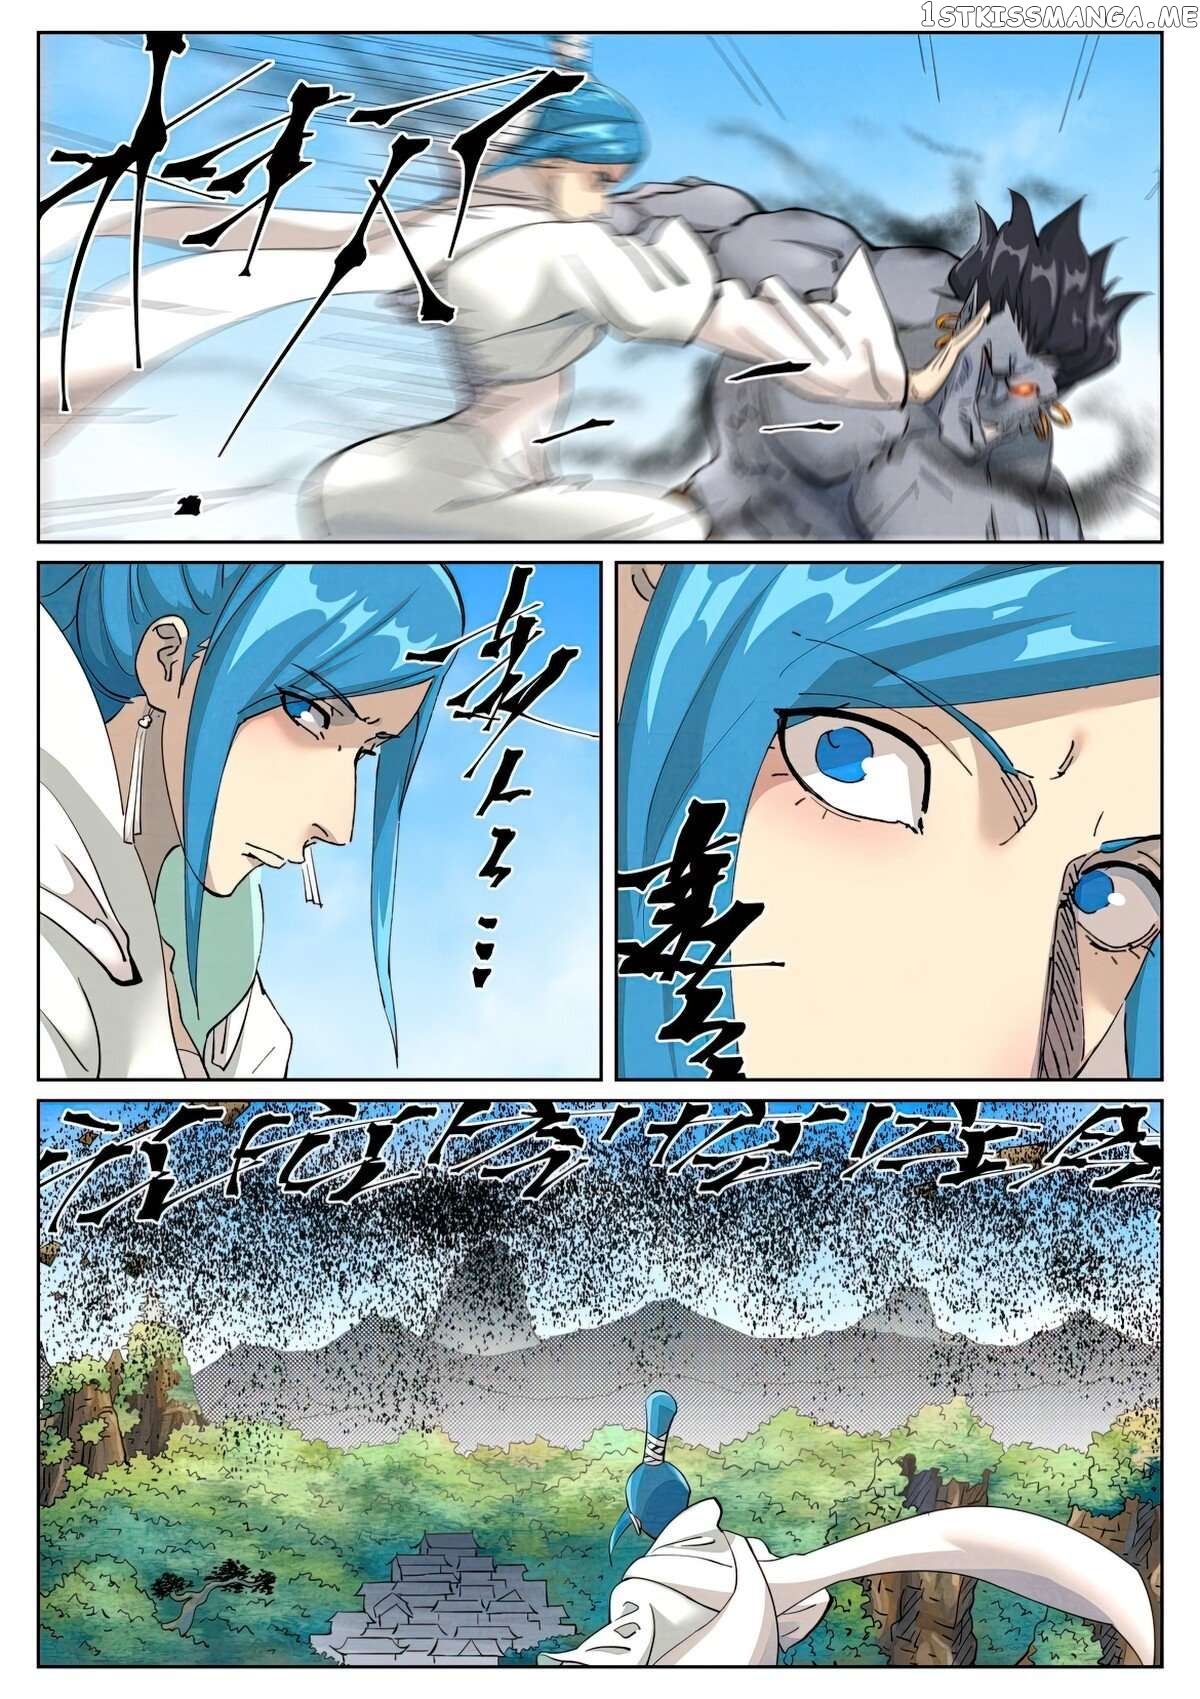 Tales of Demons and Gods Manhua Chapter 438.6 - Page 5